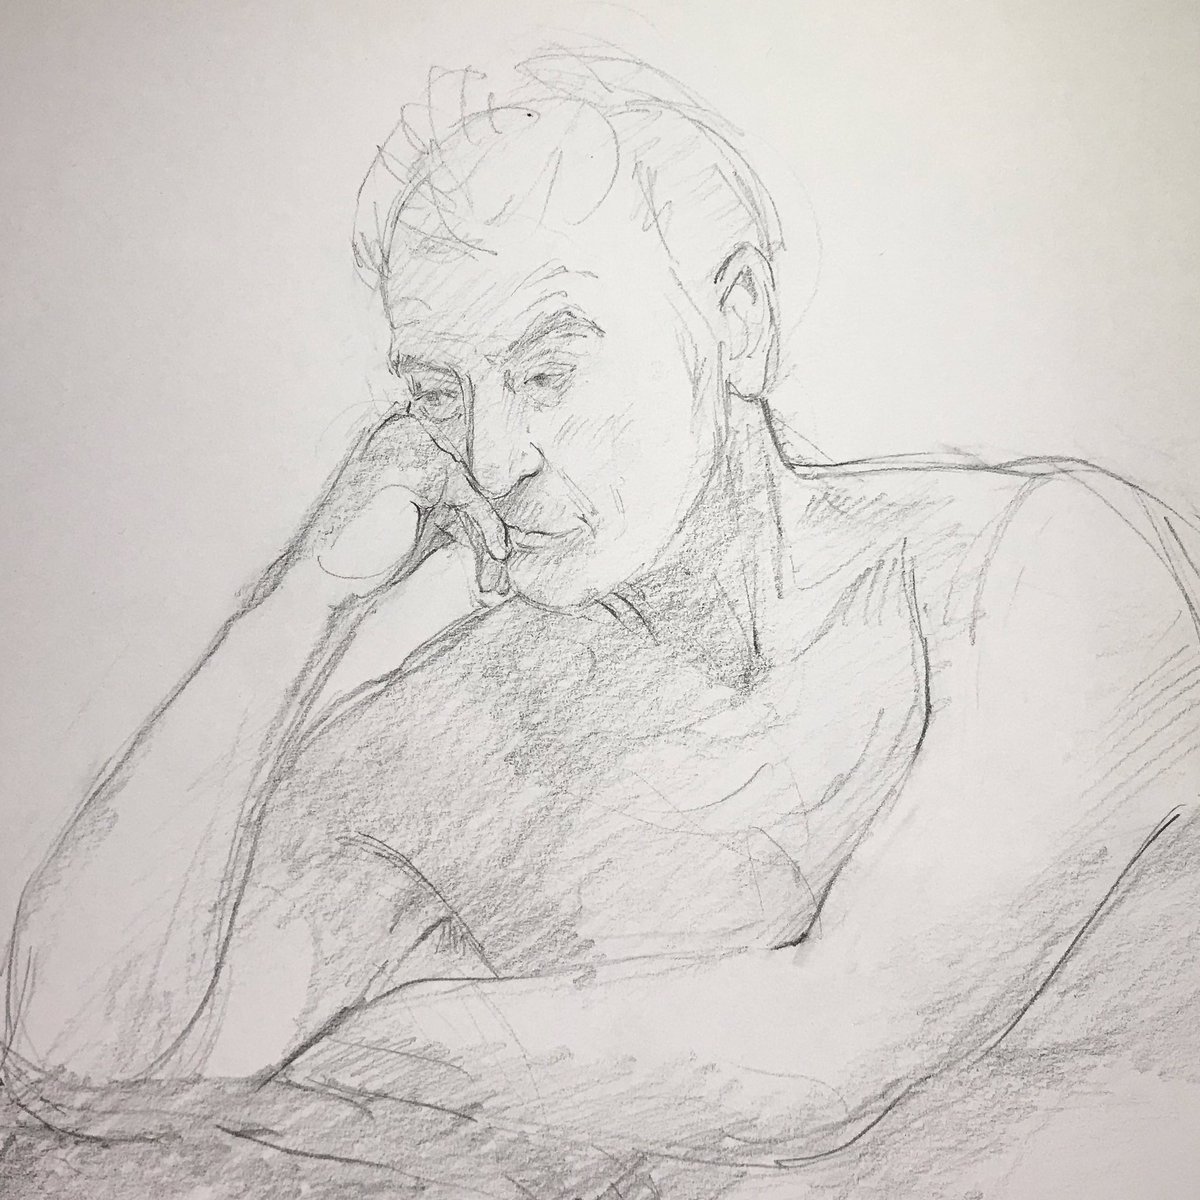 Day 27: an extract from a life drawing. Life drawing is one of those roots that everything seems to come back to. It’s such an important foundation for learning to draw regardless off your favoured medium and feels very much like fitness training for artists.

#portrait #BDF2021